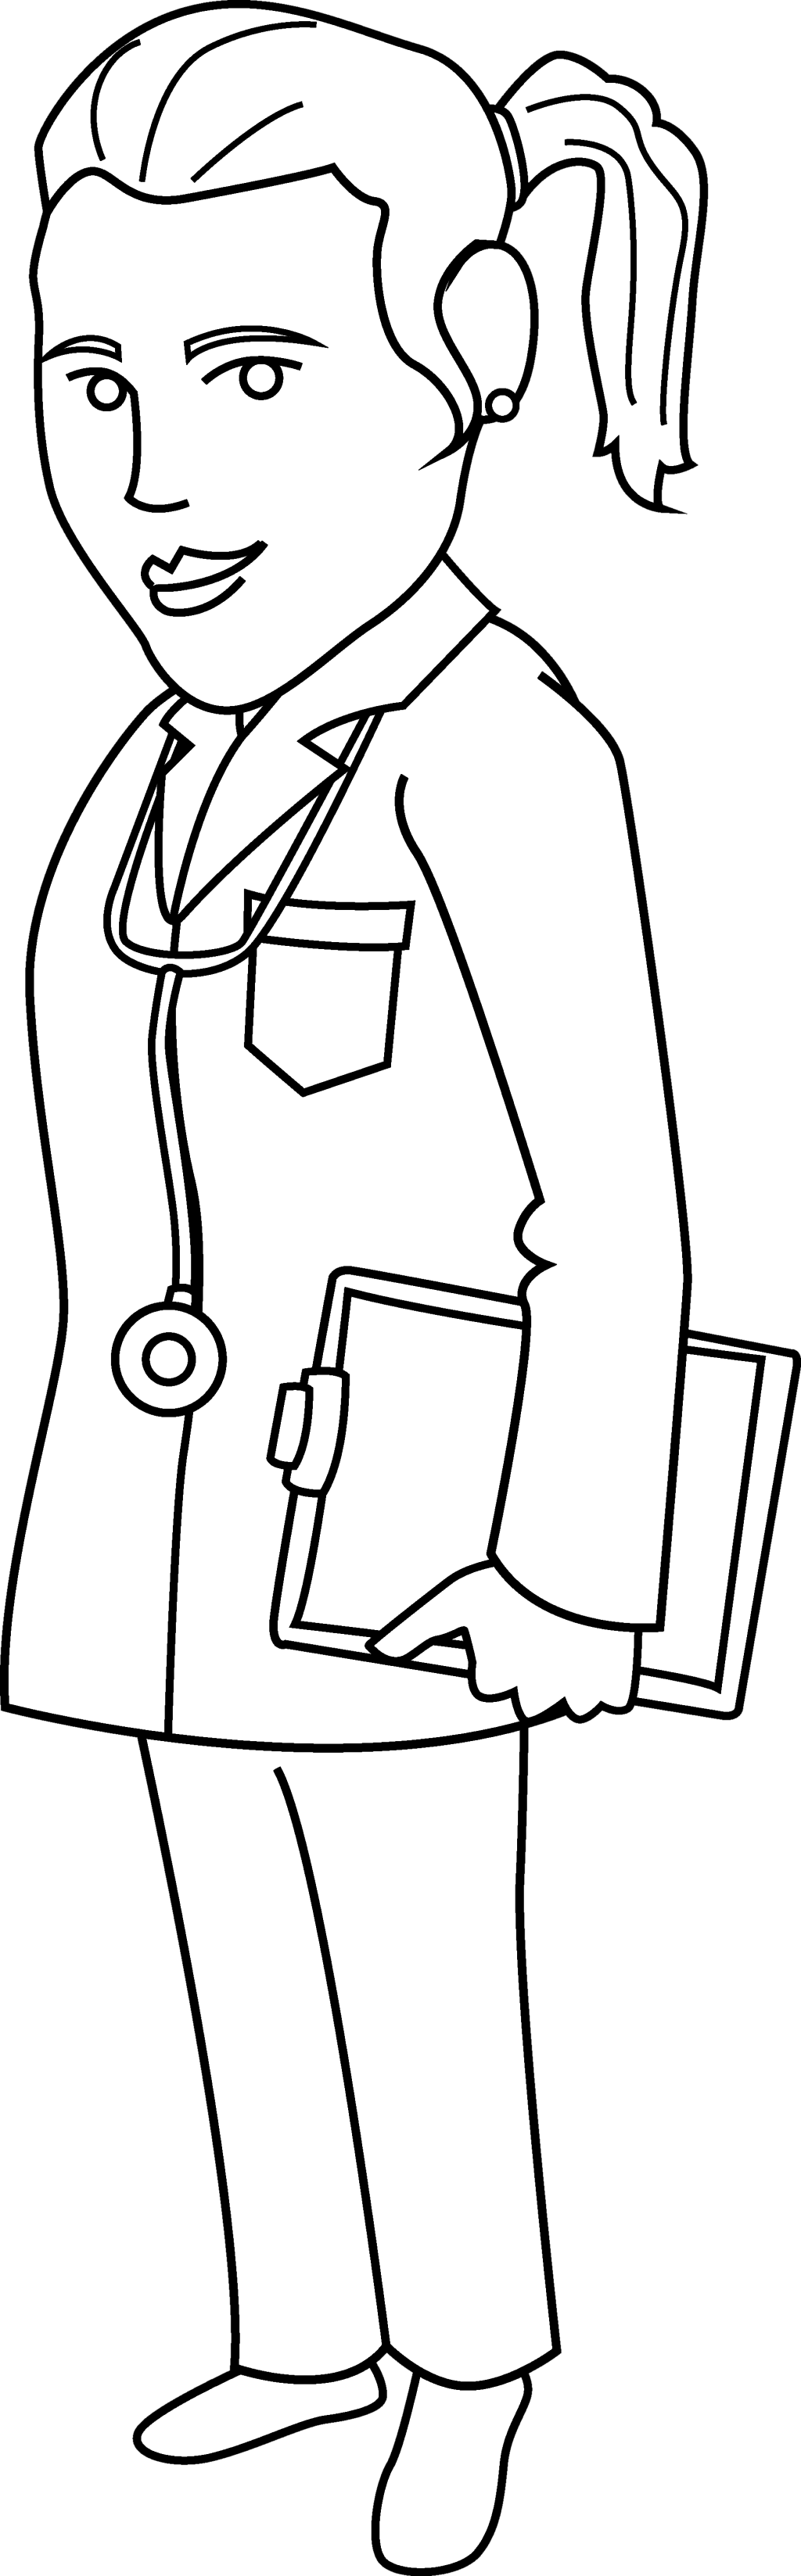 Coloring clipart doctor.